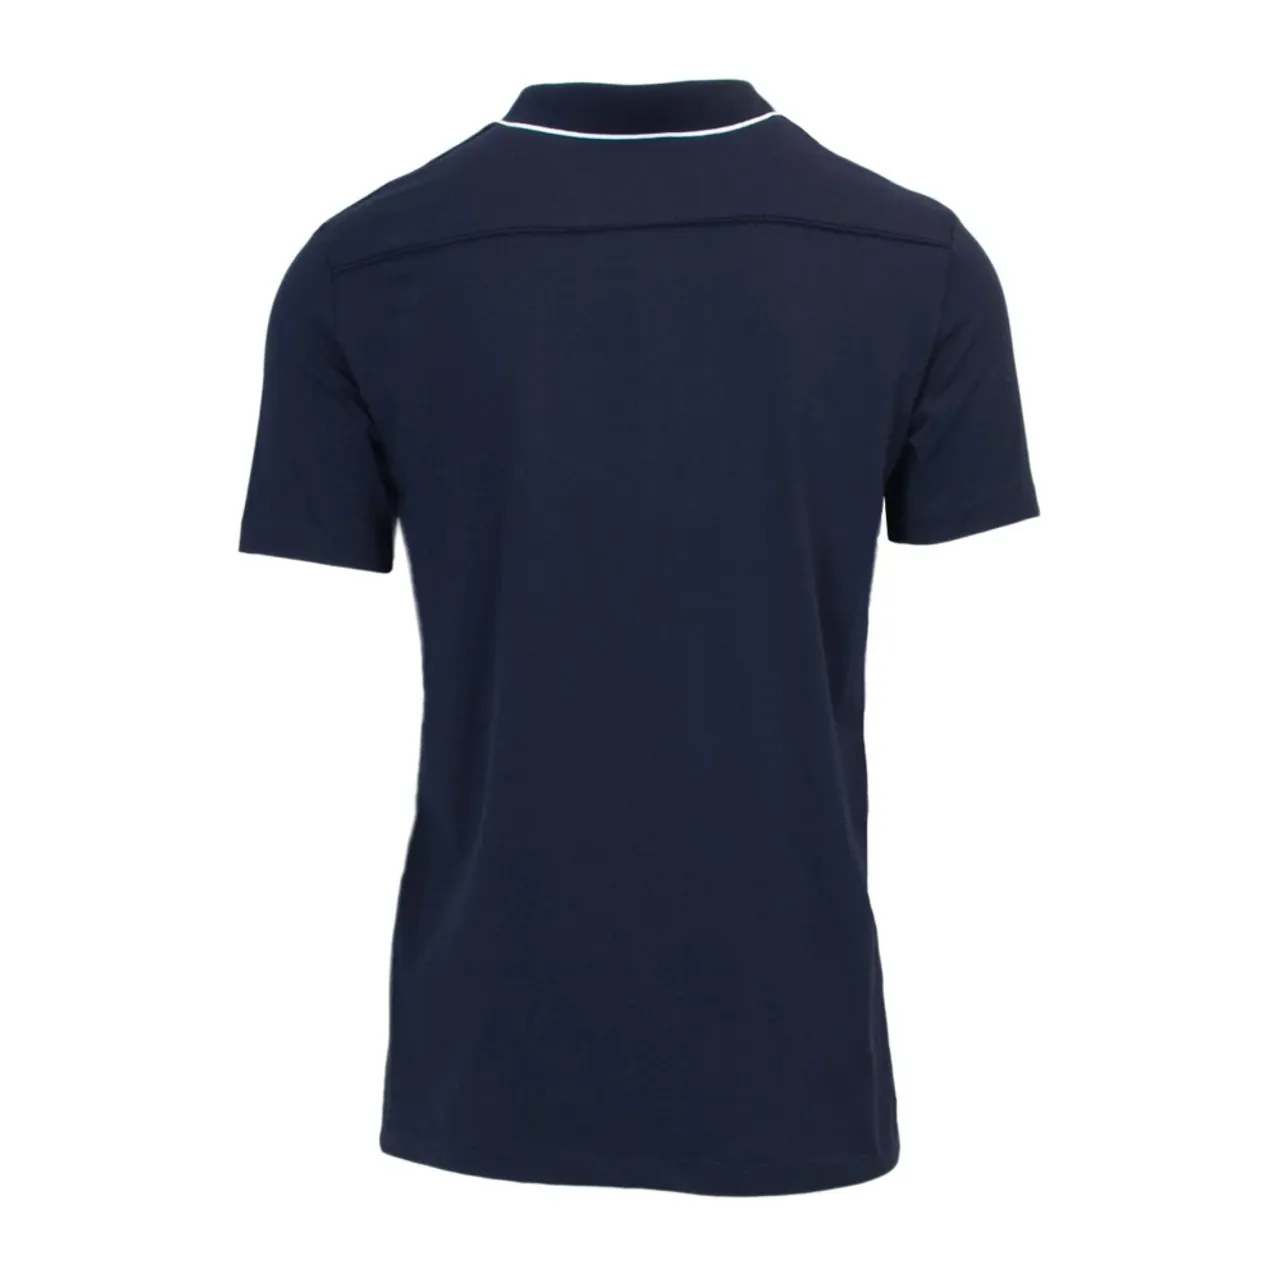 Armani Exchange , Short-Sleeved Button-Fastening Polo ,Blue male, Sizes: